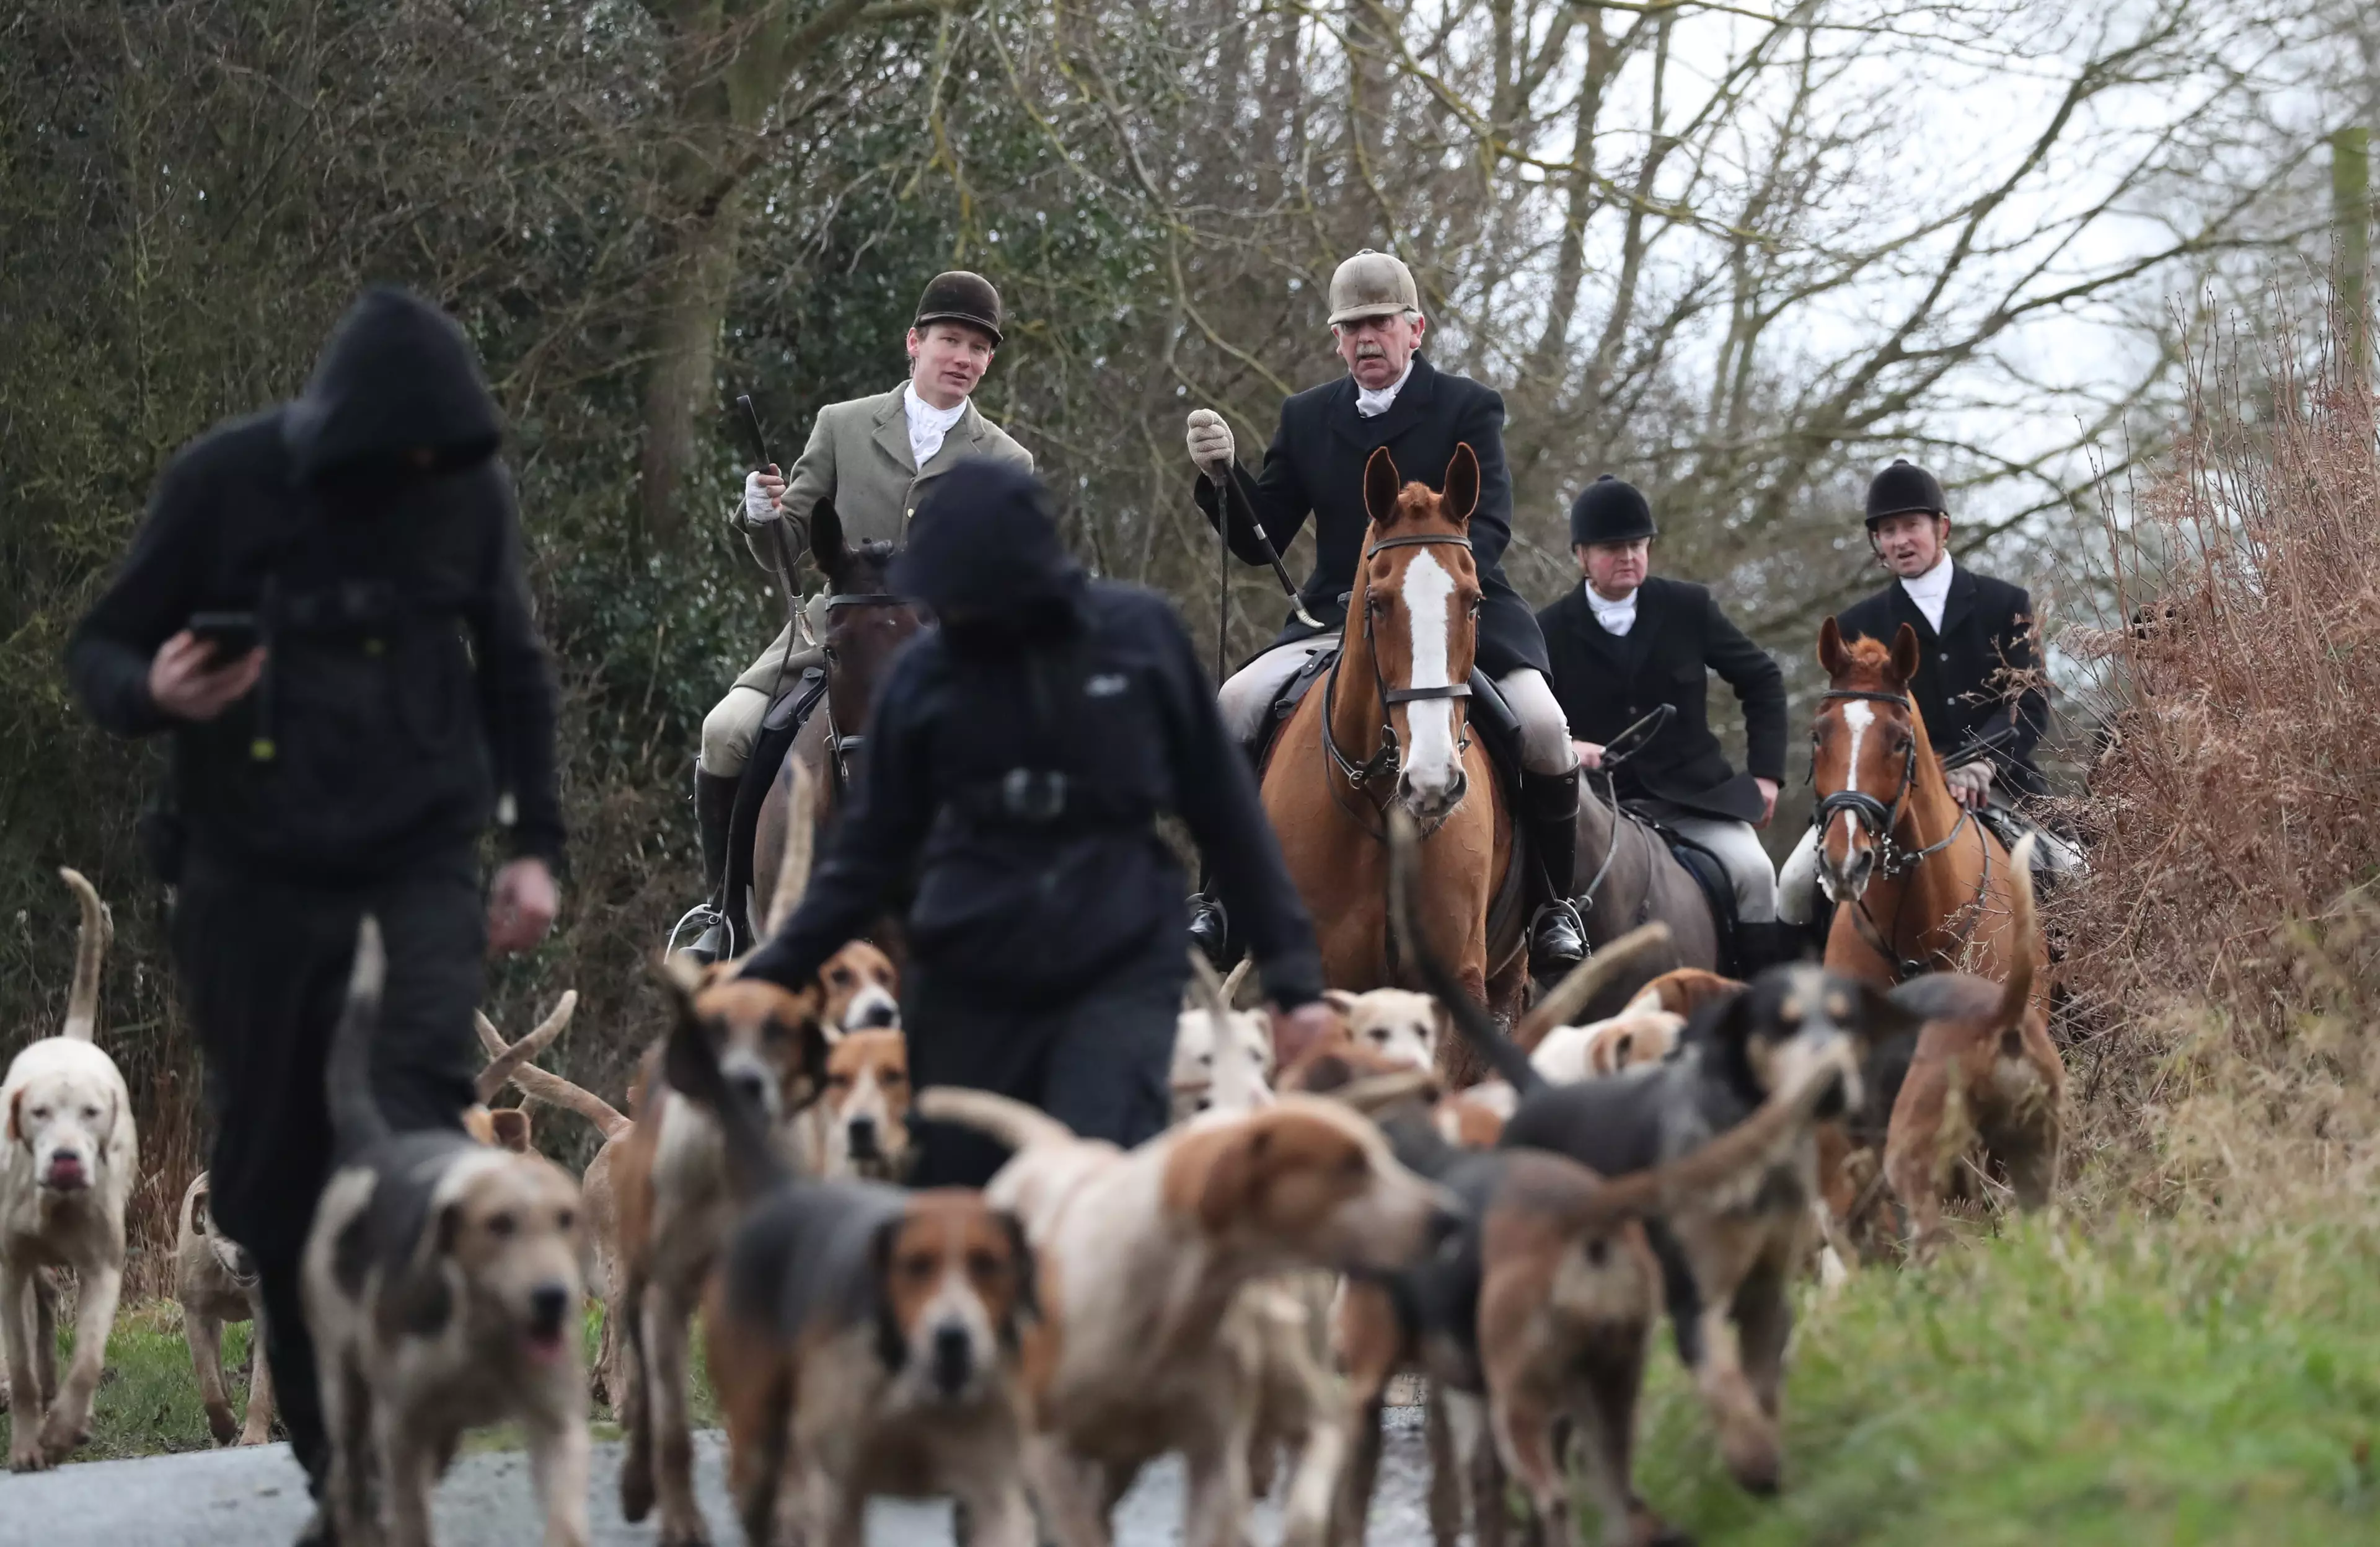 Anti-hunting groups are calling for information on the killing [STOCK IMAGE] (